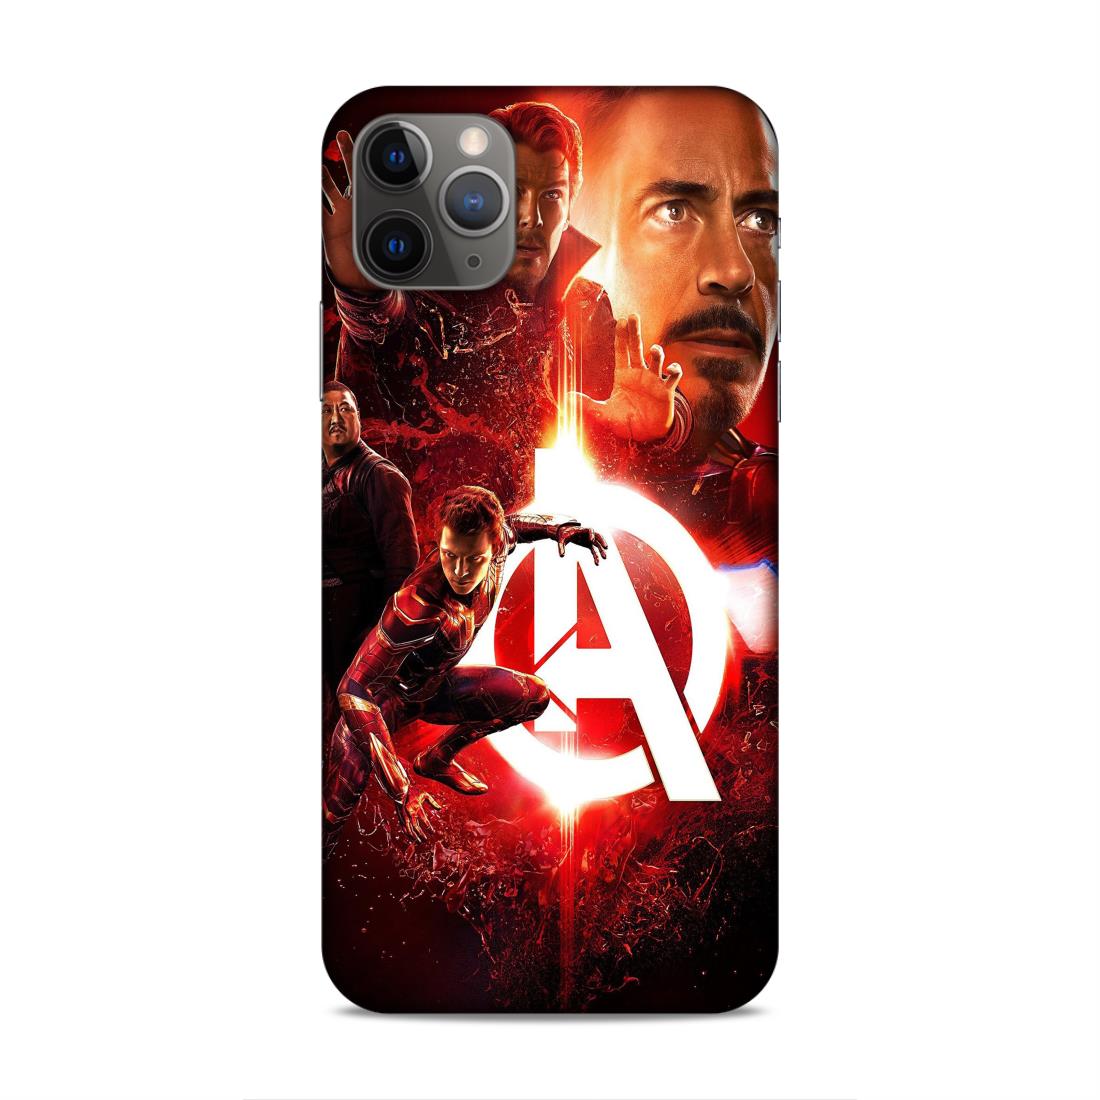 Avengers Hard Back Case For Apple iPhone 11 Pro Max